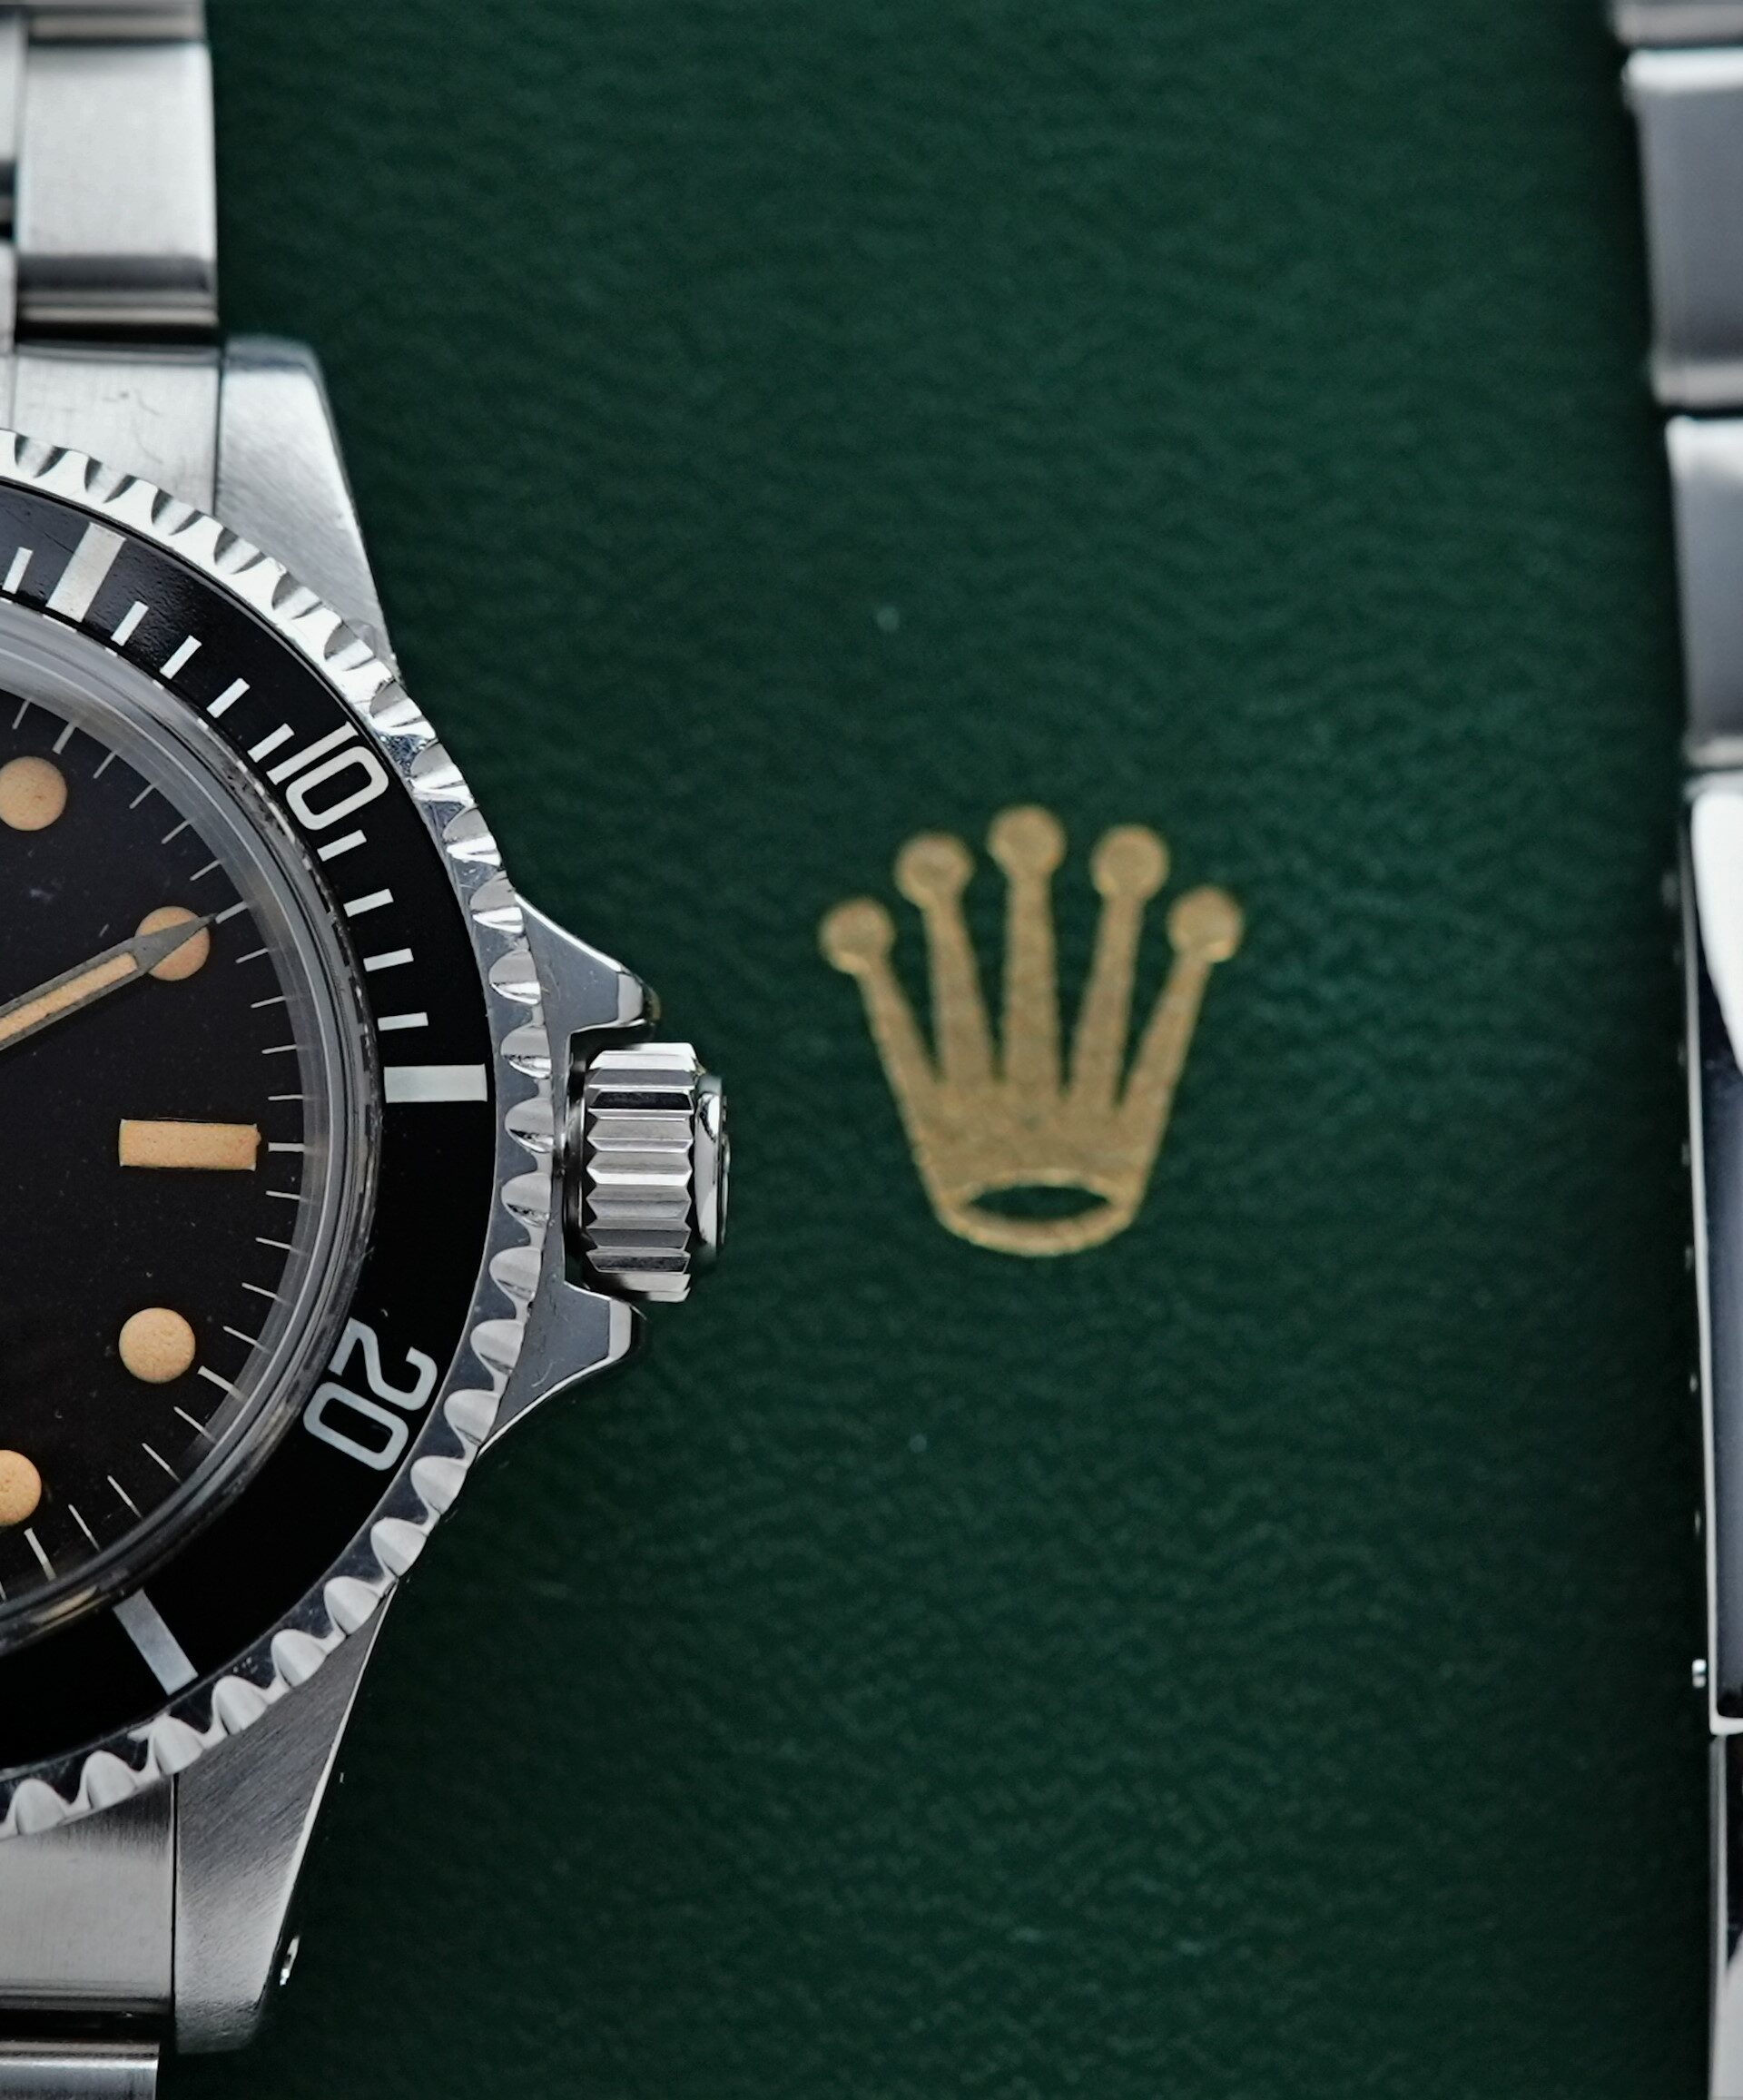 Rolex Submariner 5513 Bart Simpson Tropical Dial Original Patina Unpolished watch with bracelet.